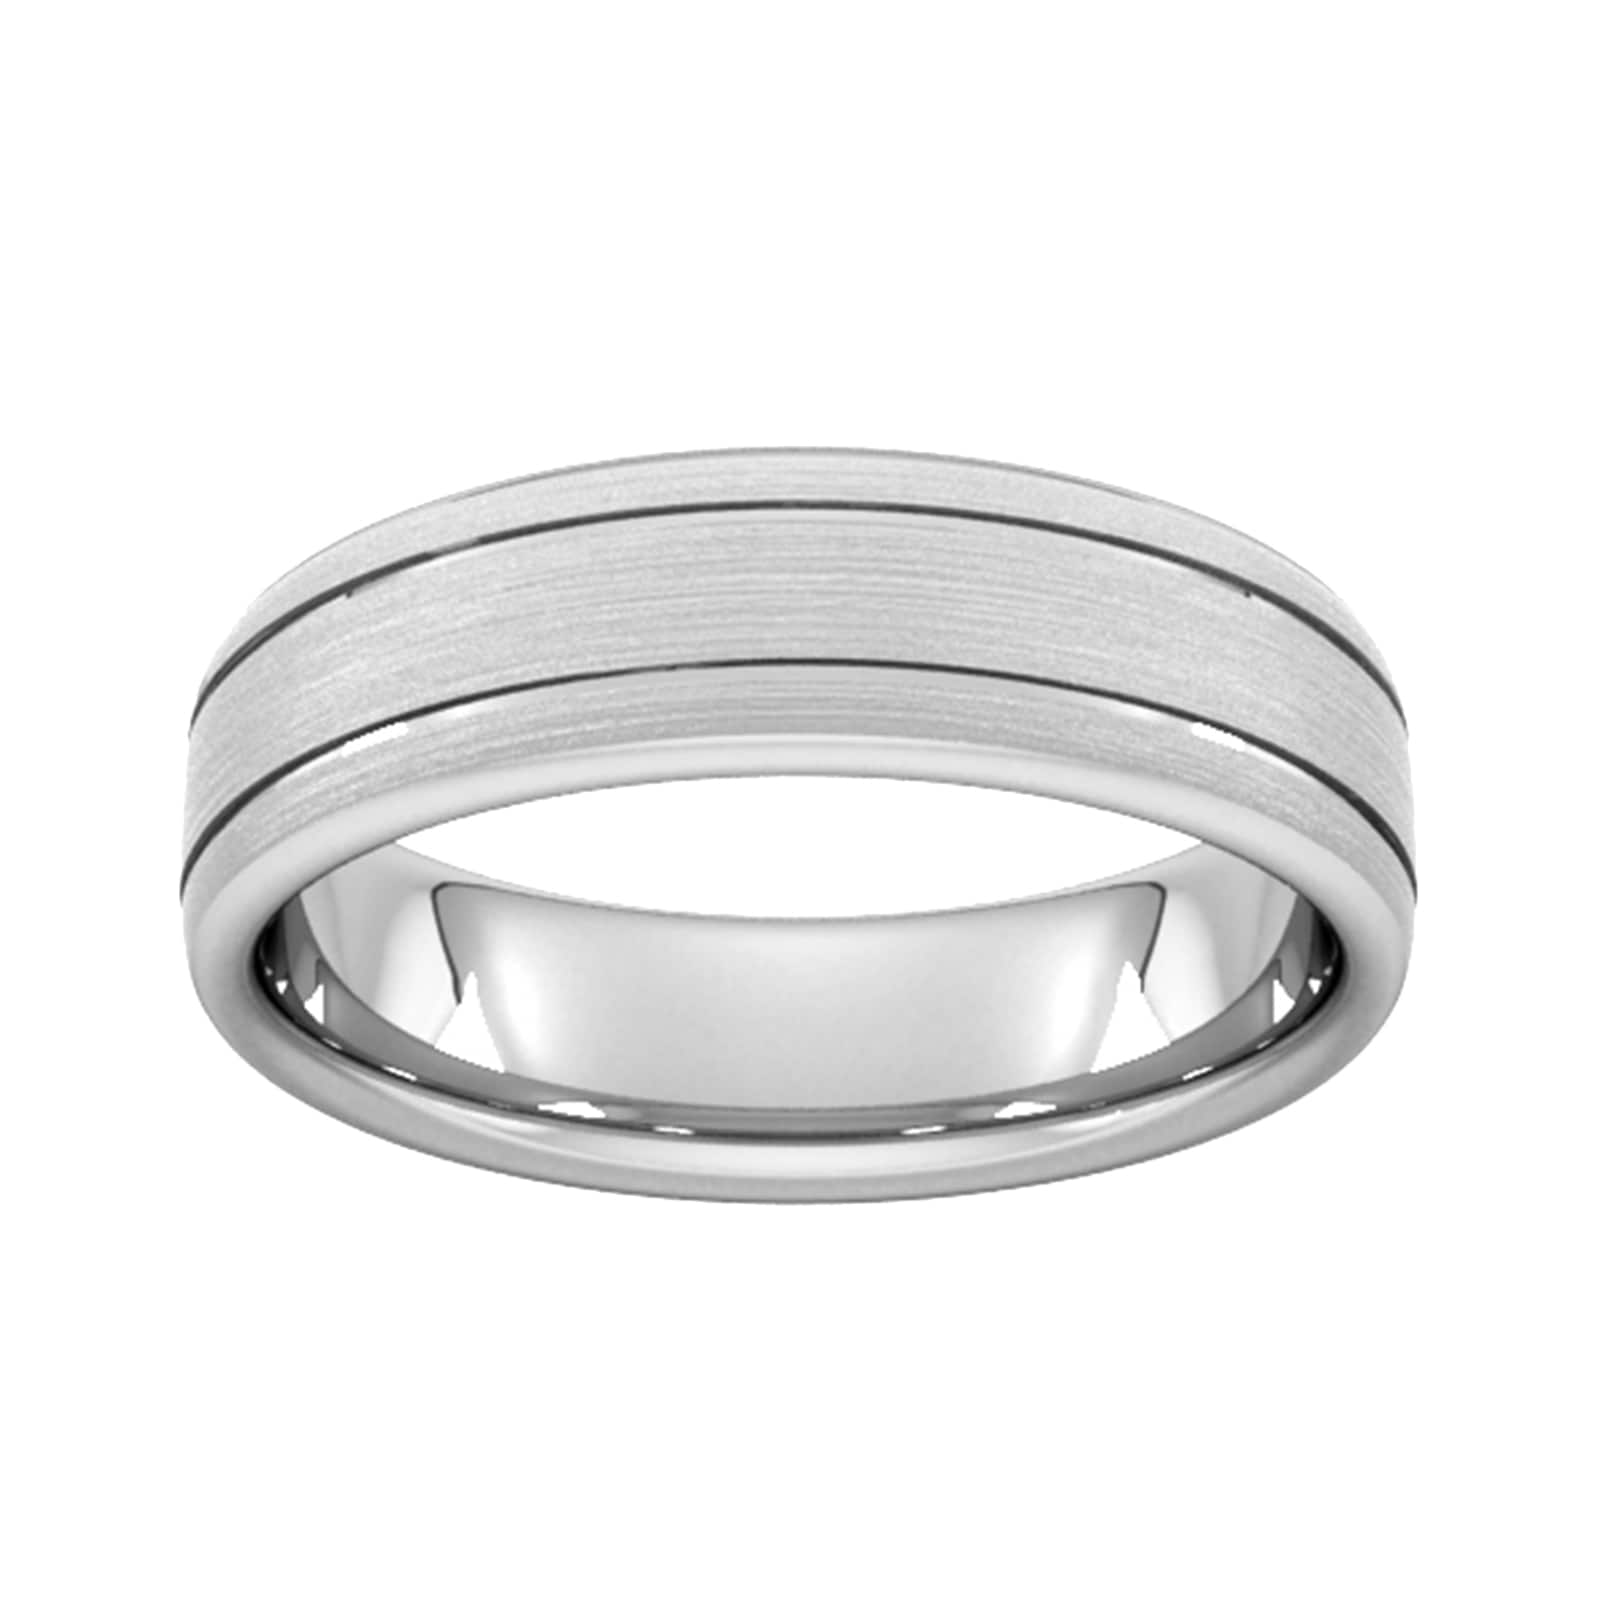 6mm Traditional Court Heavy Matt Finish With Double Grooves Wedding Ring In 9 Carat White Gold - Ring Size R